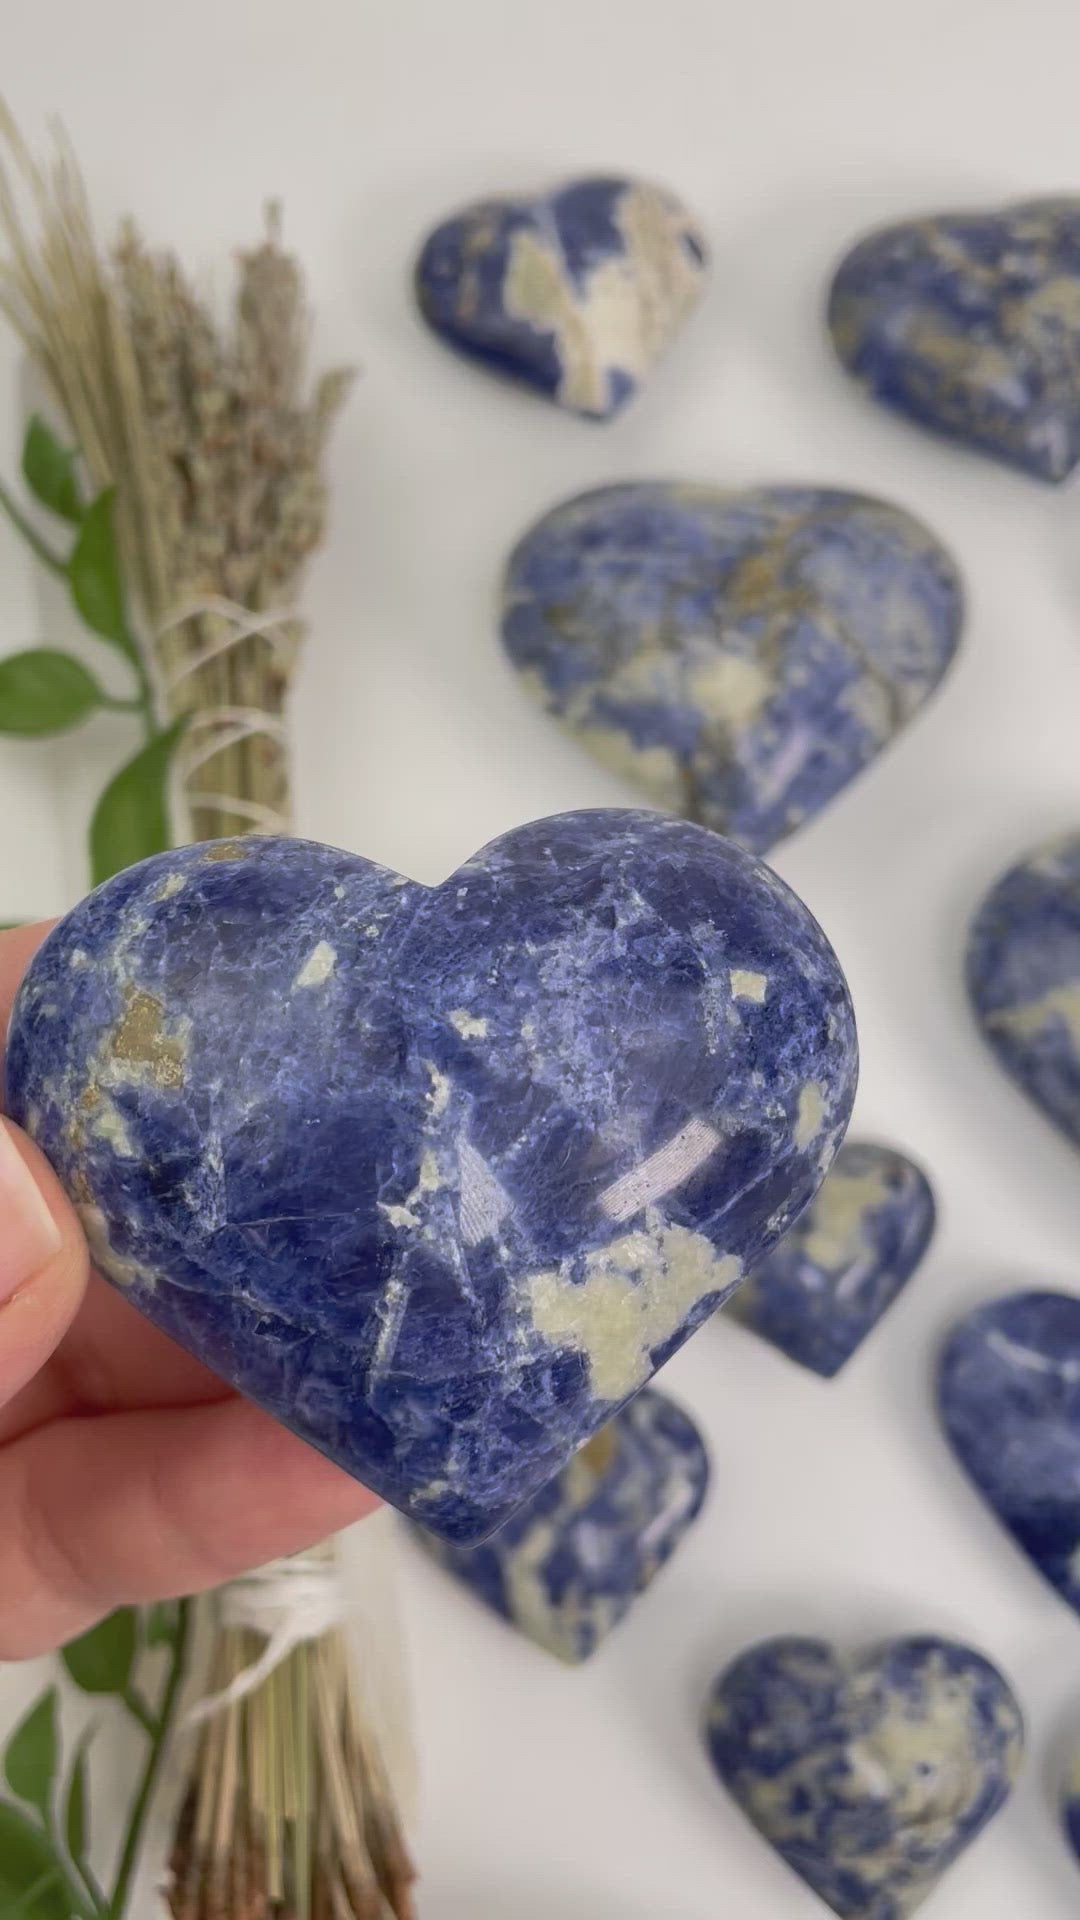 video of one sodalite heart shaped stone in hand that pans to many different sodalite heart shaped stone weights on display